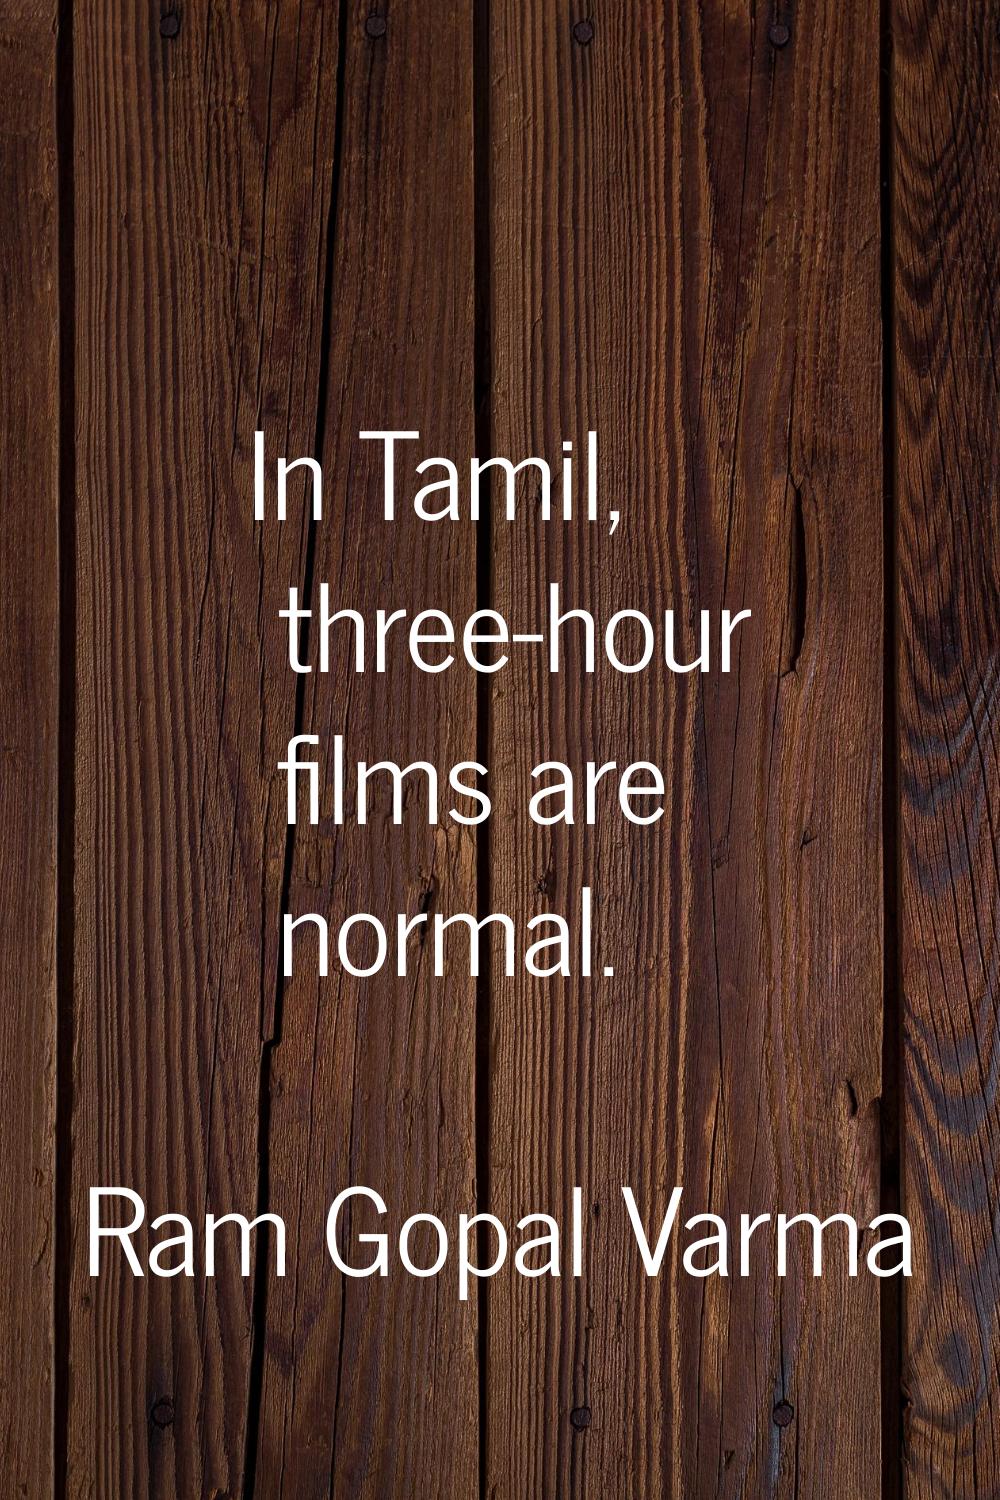 In Tamil, three-hour films are normal.